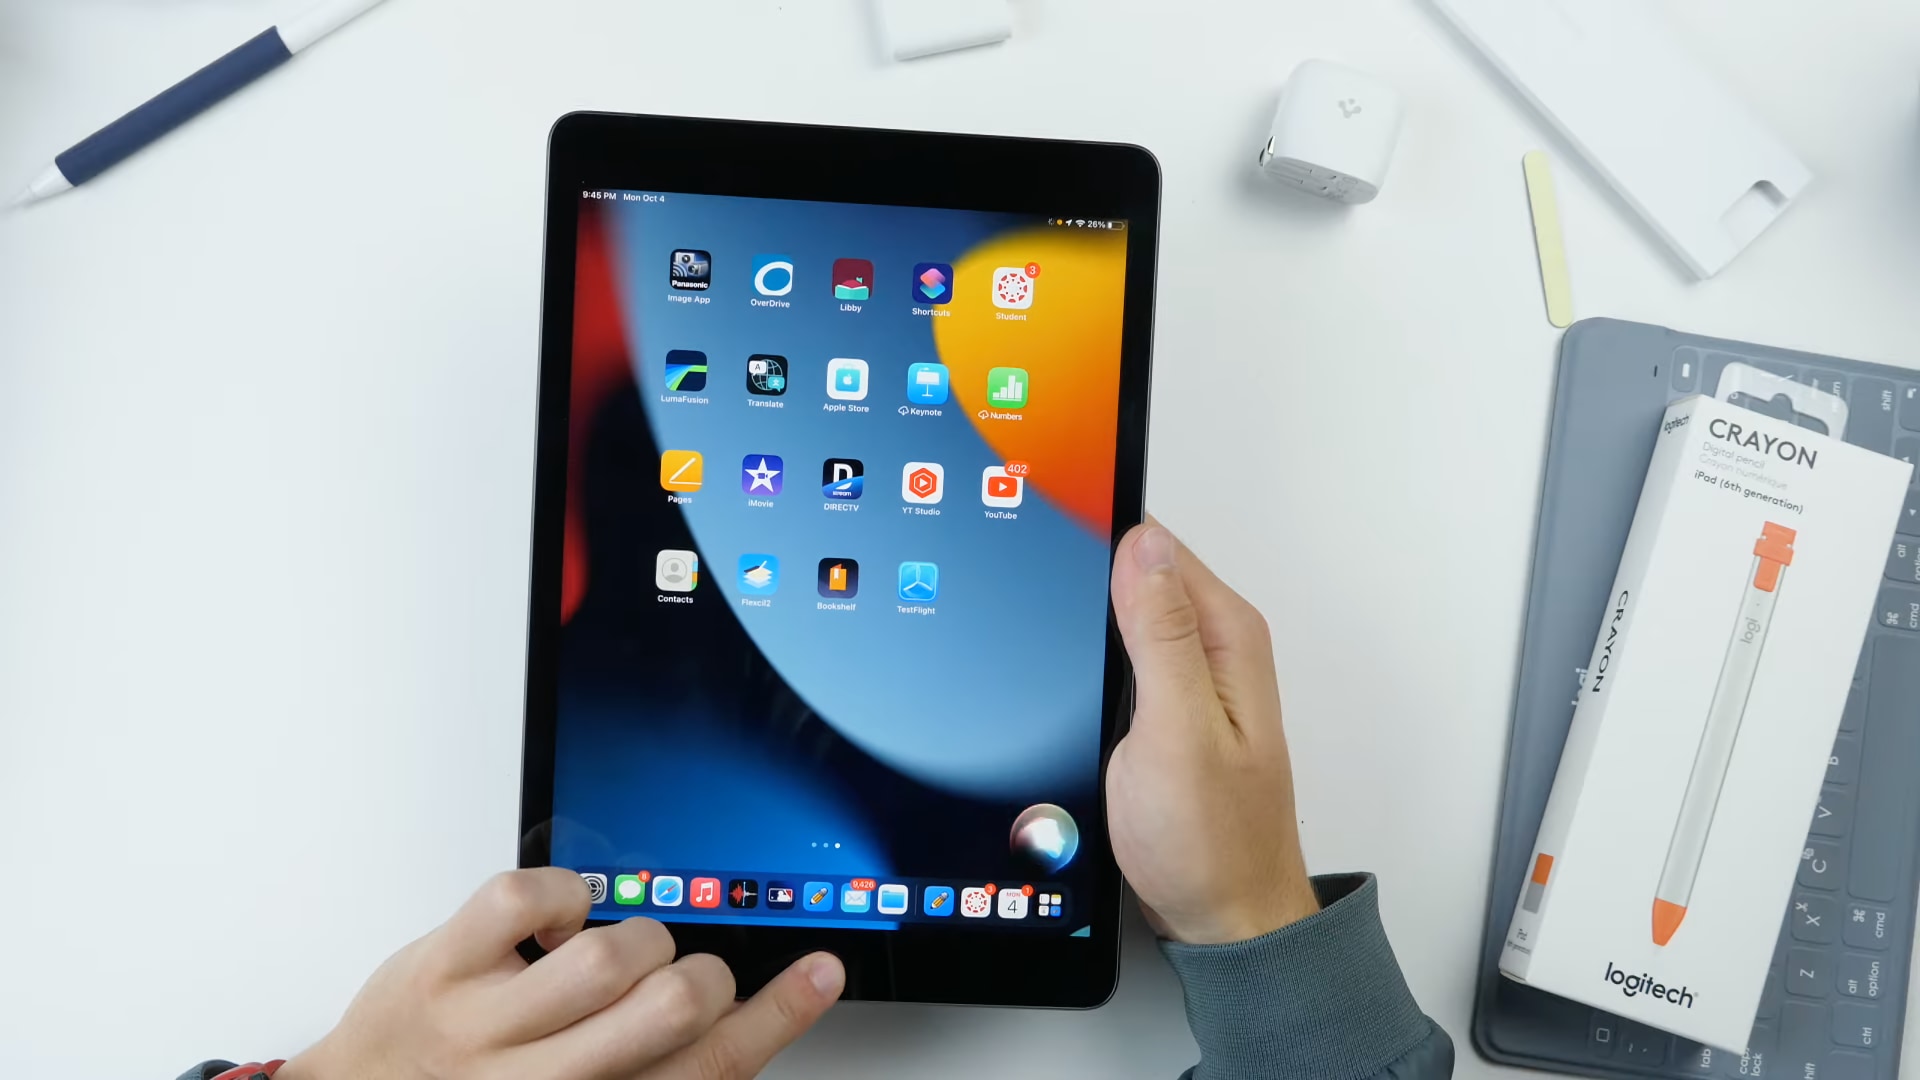 Video: Tips and tricks for getting started with 9th generation iPad (2021)